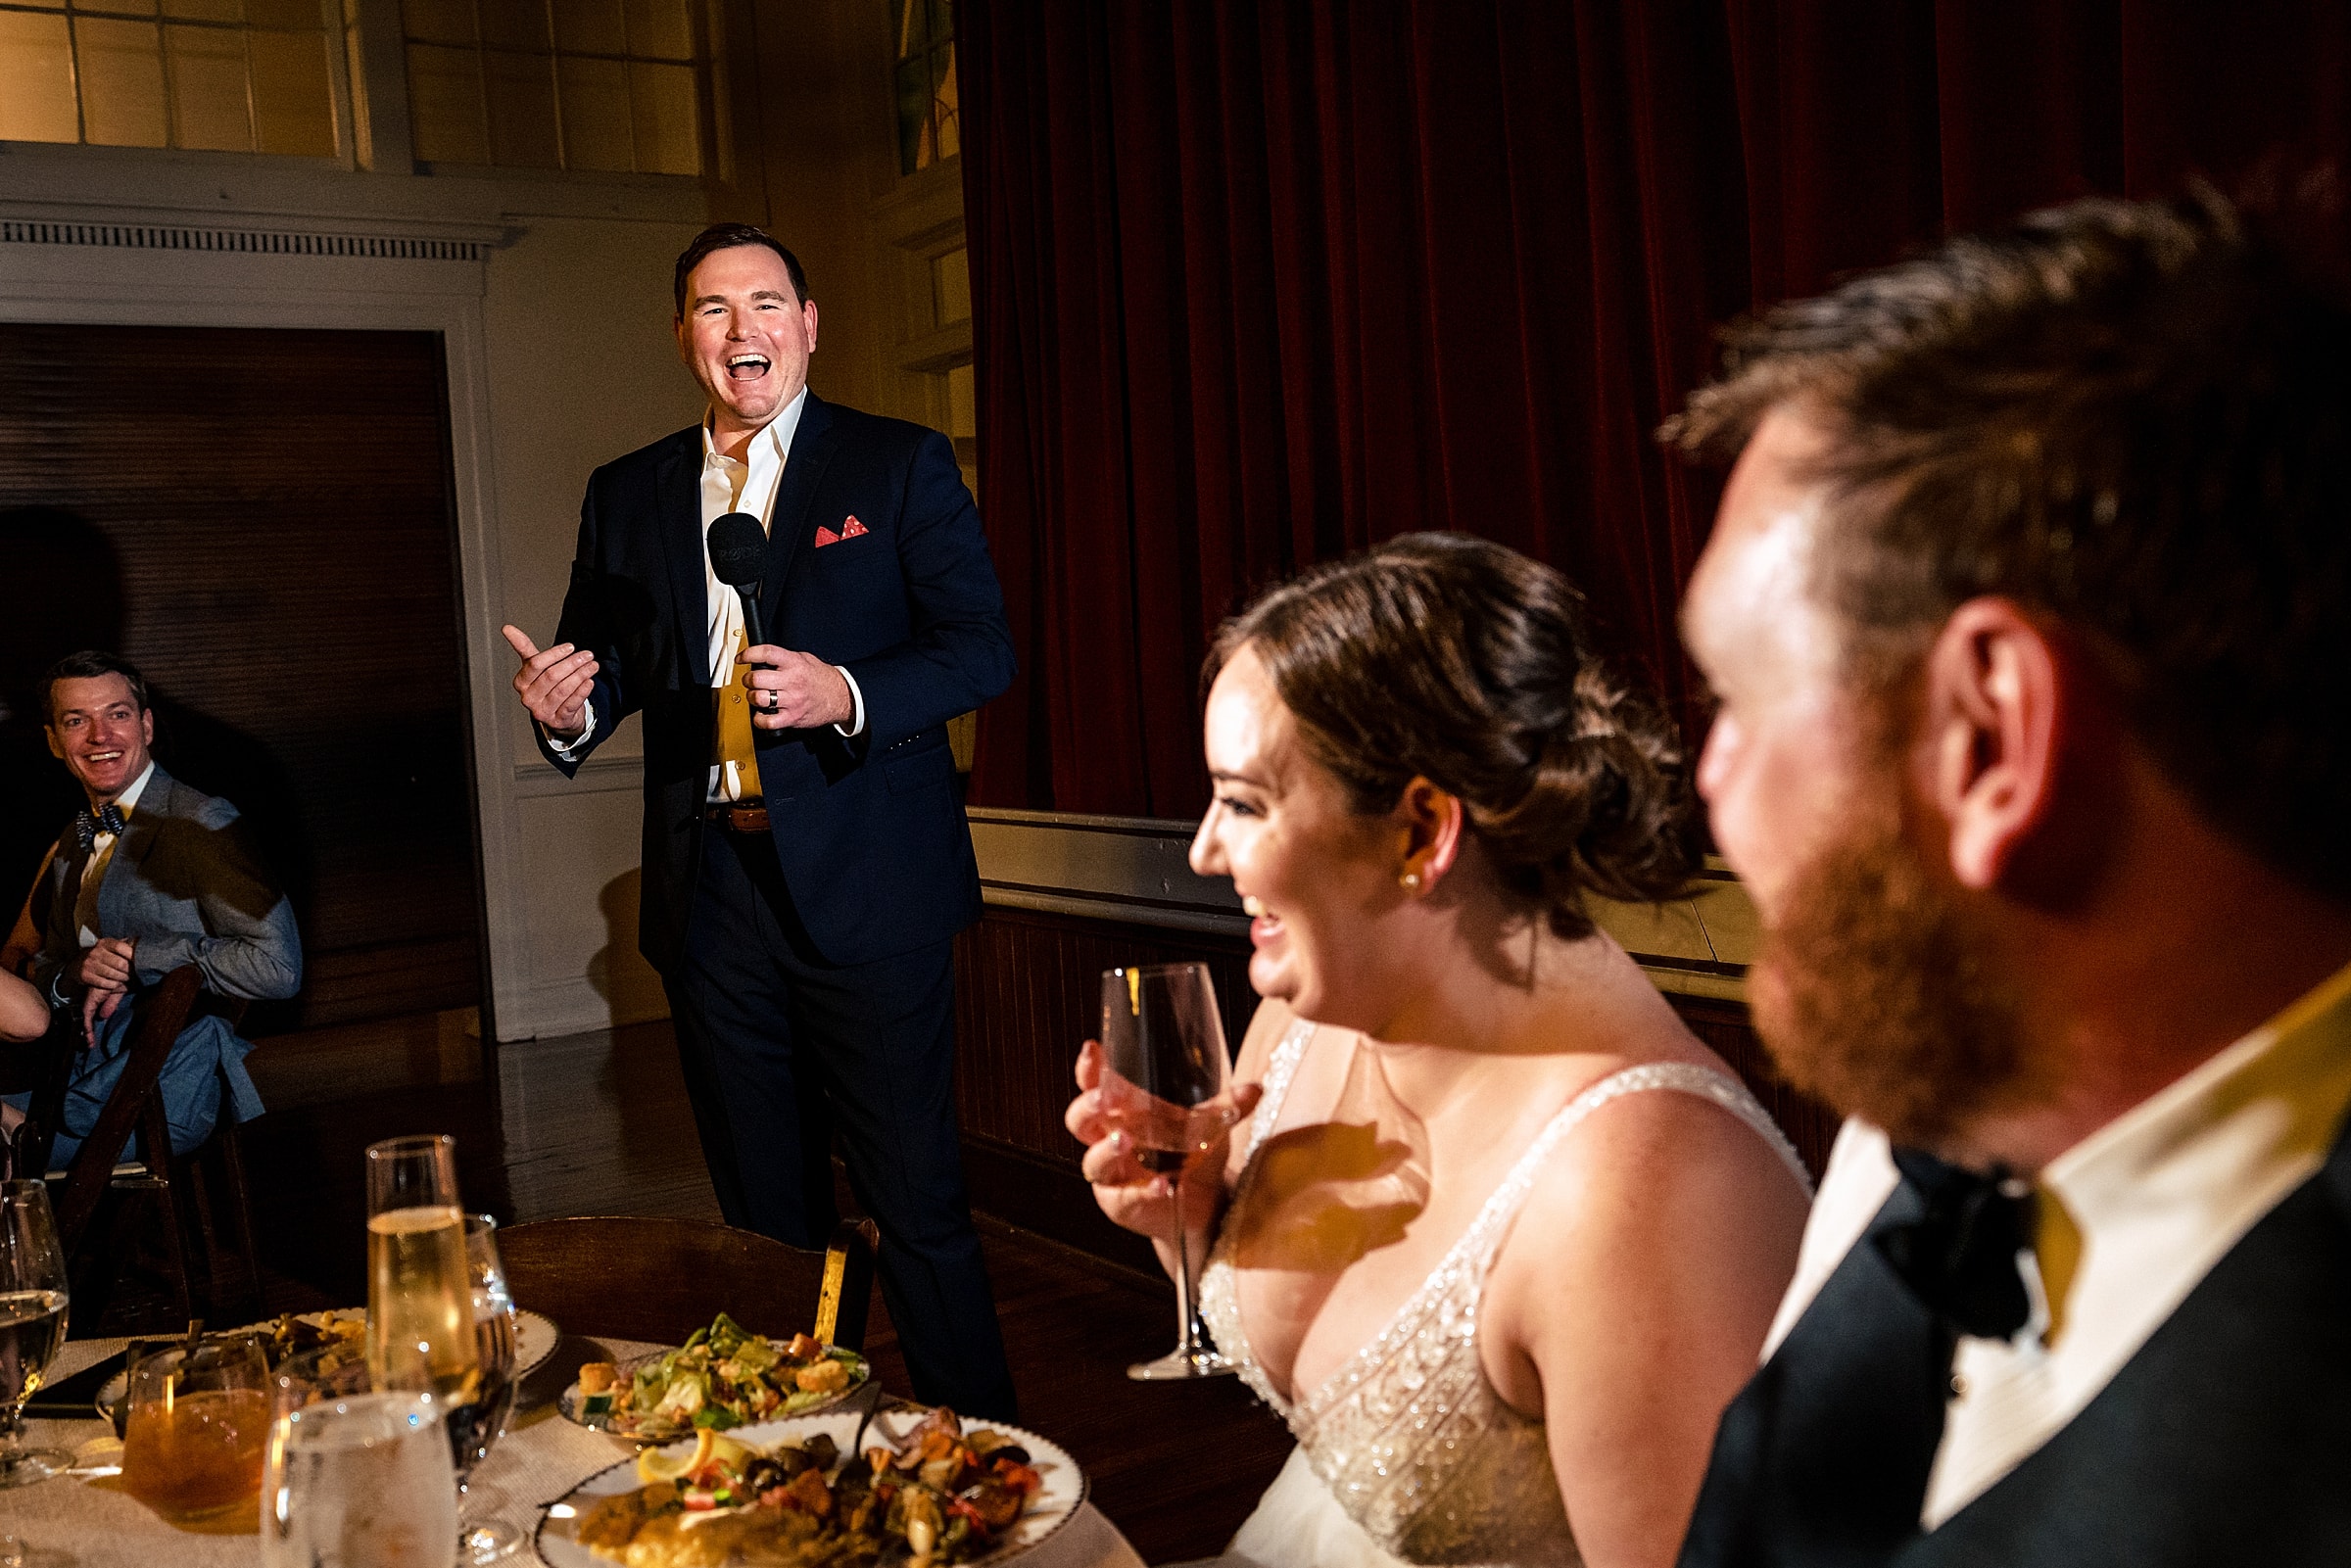 Make sure your wedding toast elicits a few laughs!